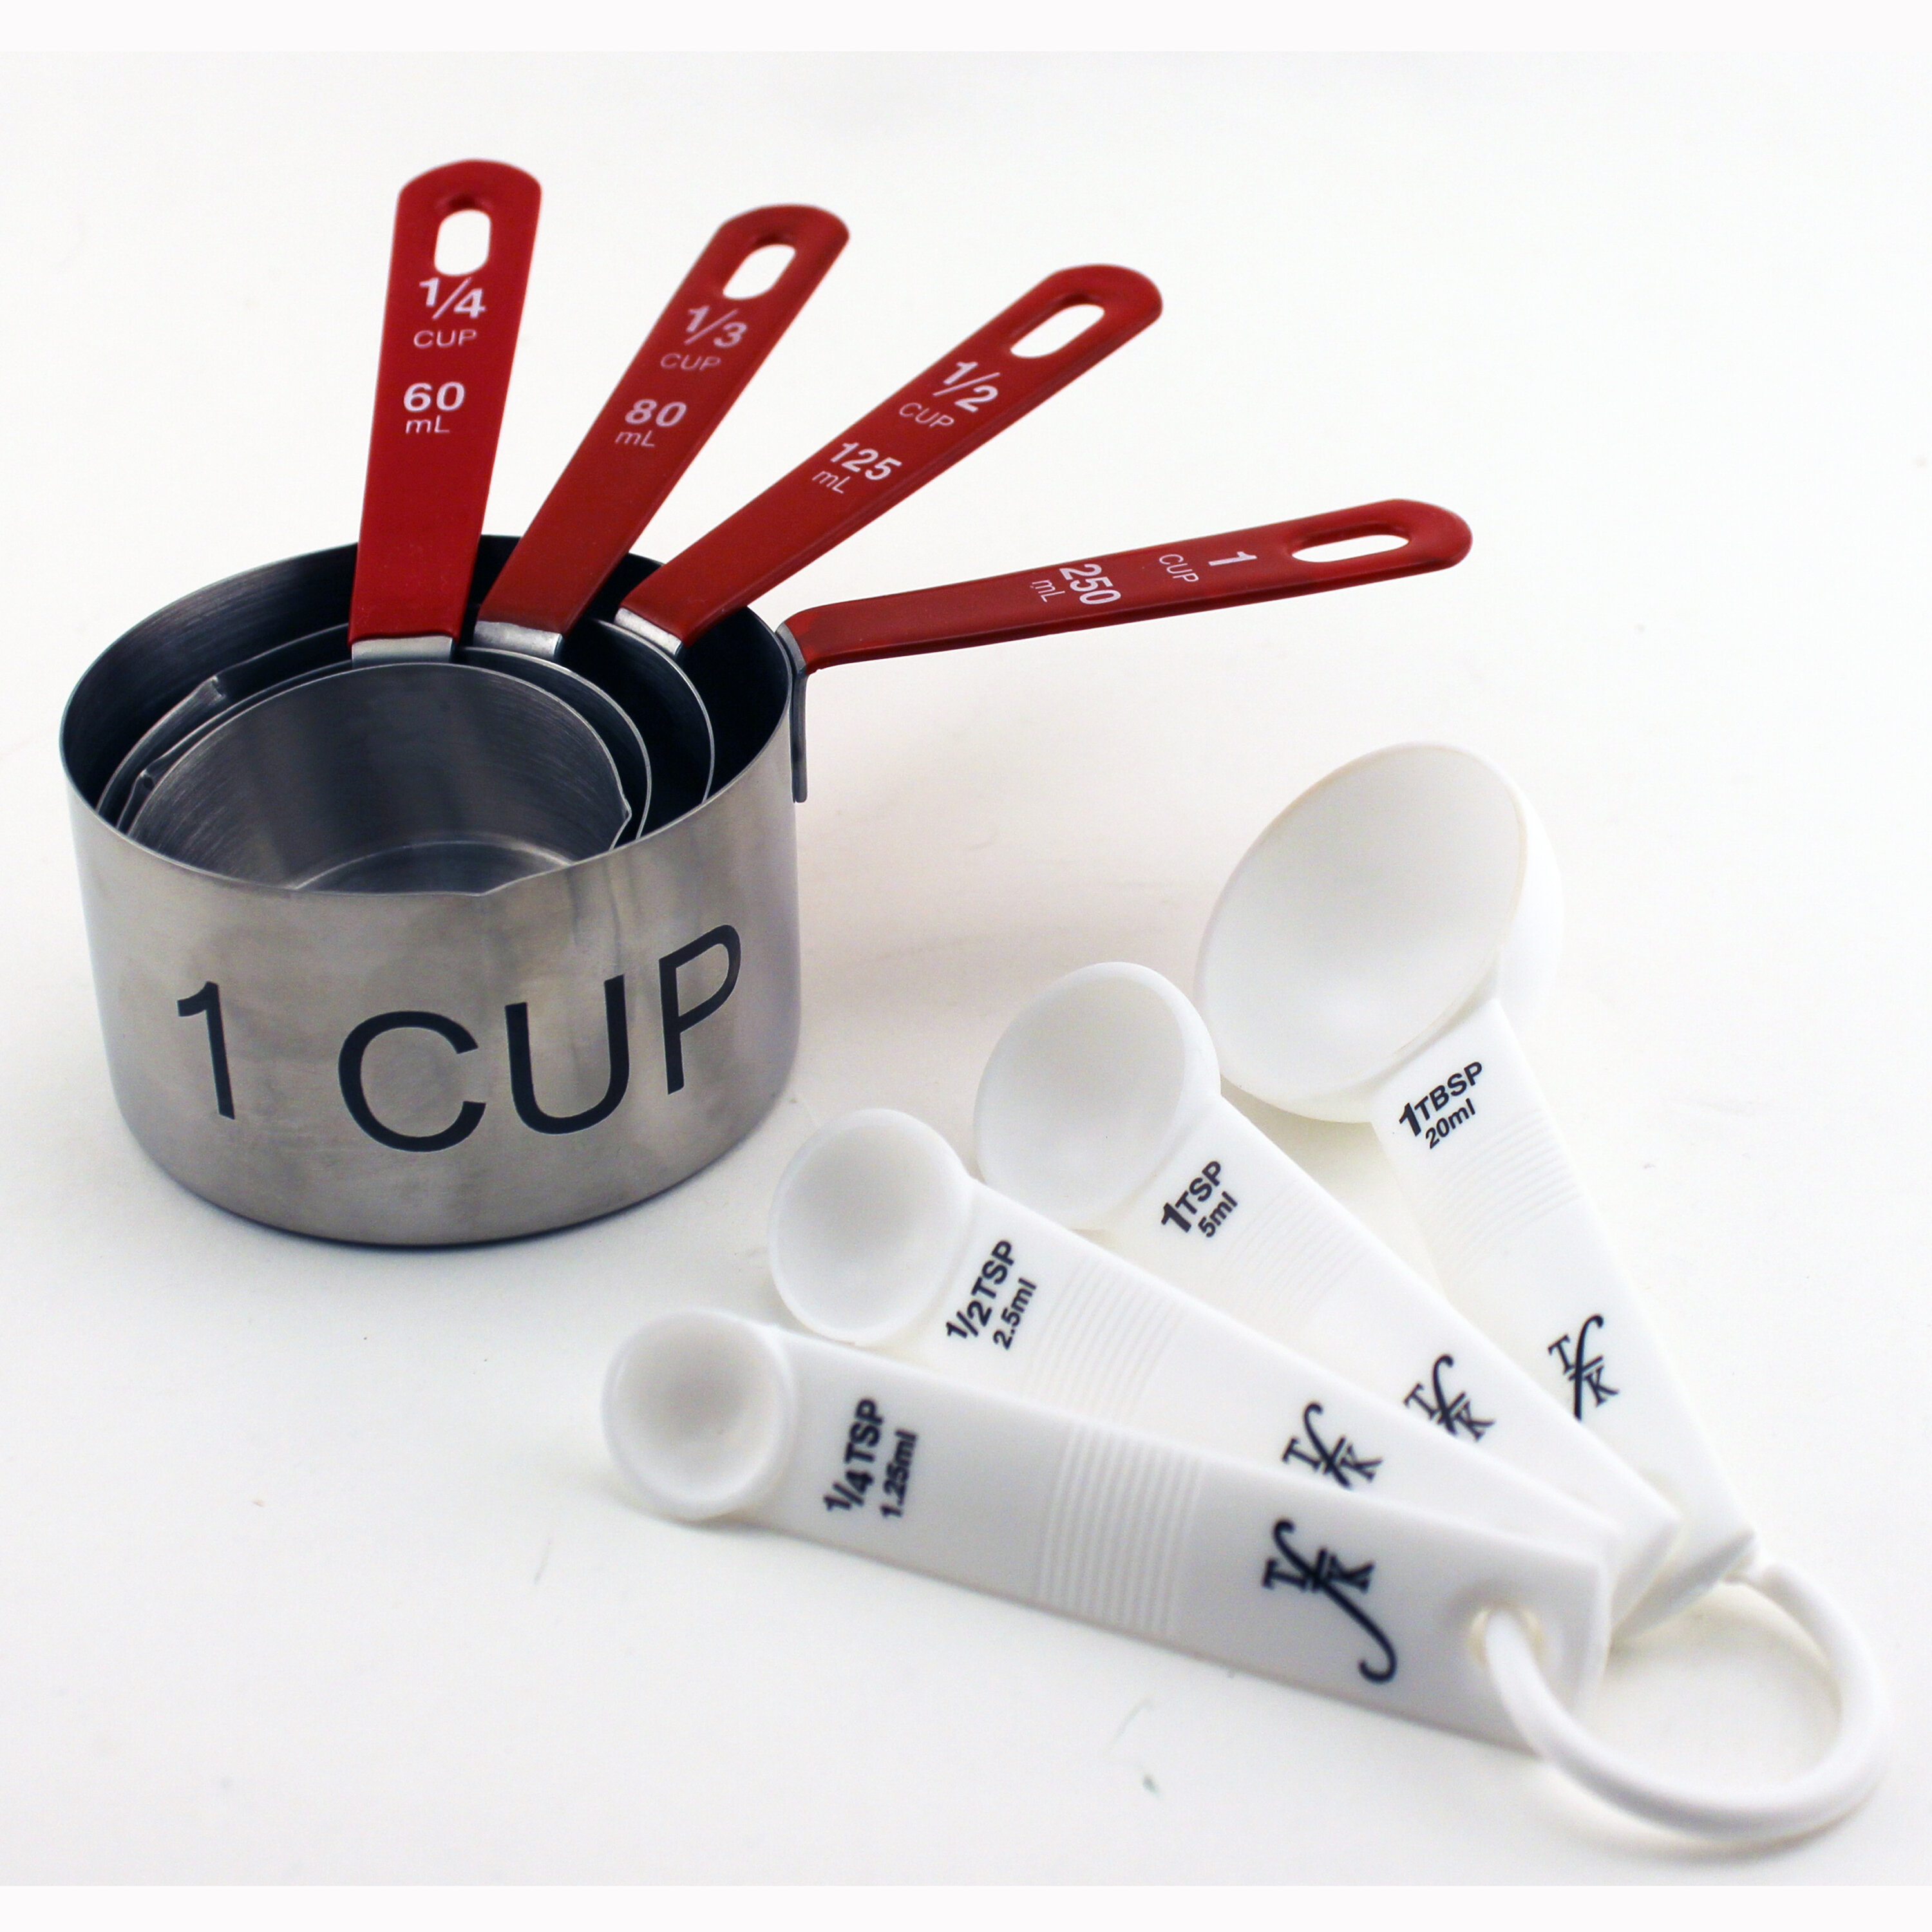 BergHOFF International 8-Pieces Stainless Steel Measuring Cup and Spoon Set